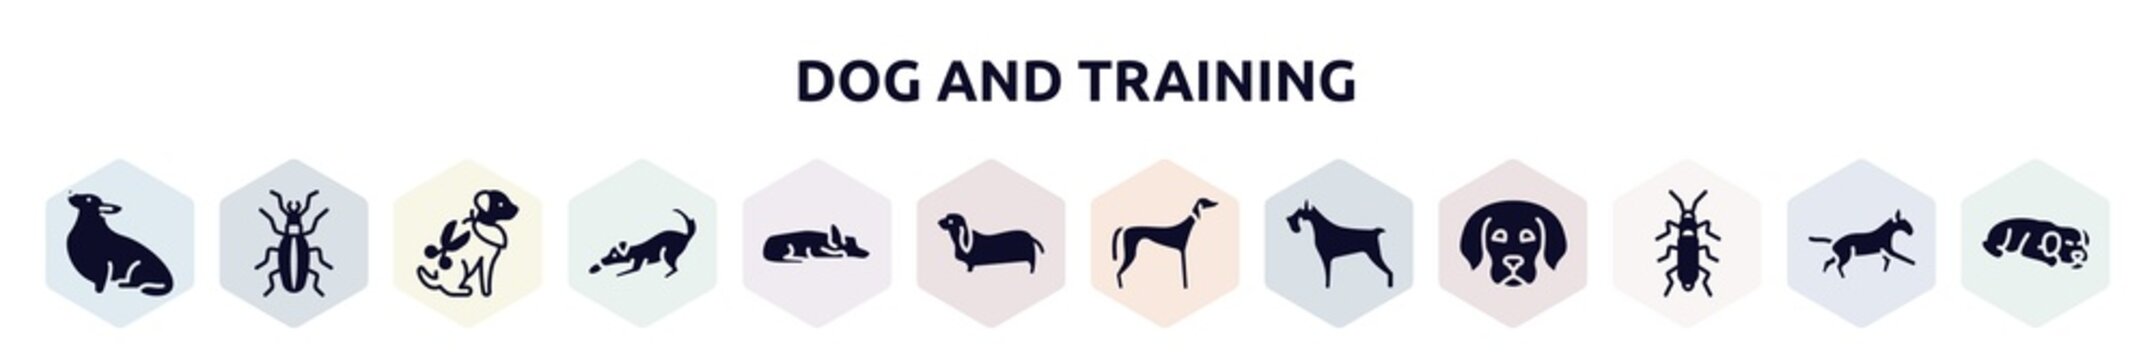 dog and training filled icons set. glyph icons such as corgi, golden ground beetle, grooming pet, dogs playing, sad dog, bas hound, saluki, miniature schnauzer, wharf borer icon.